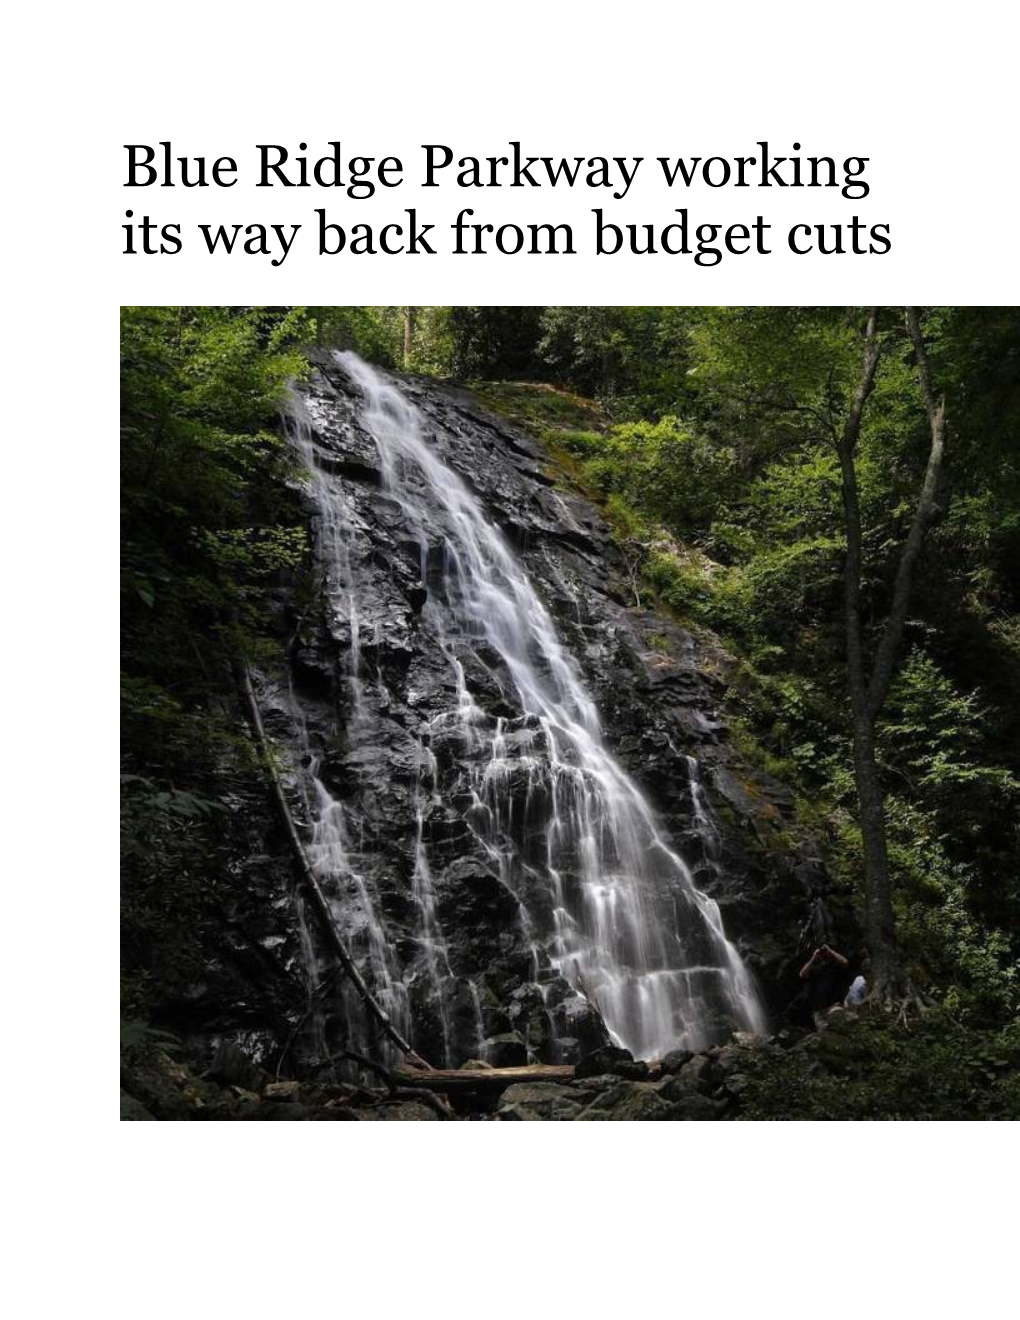 Blue Ridge Parkway Working Its Way Back from Budget Cuts